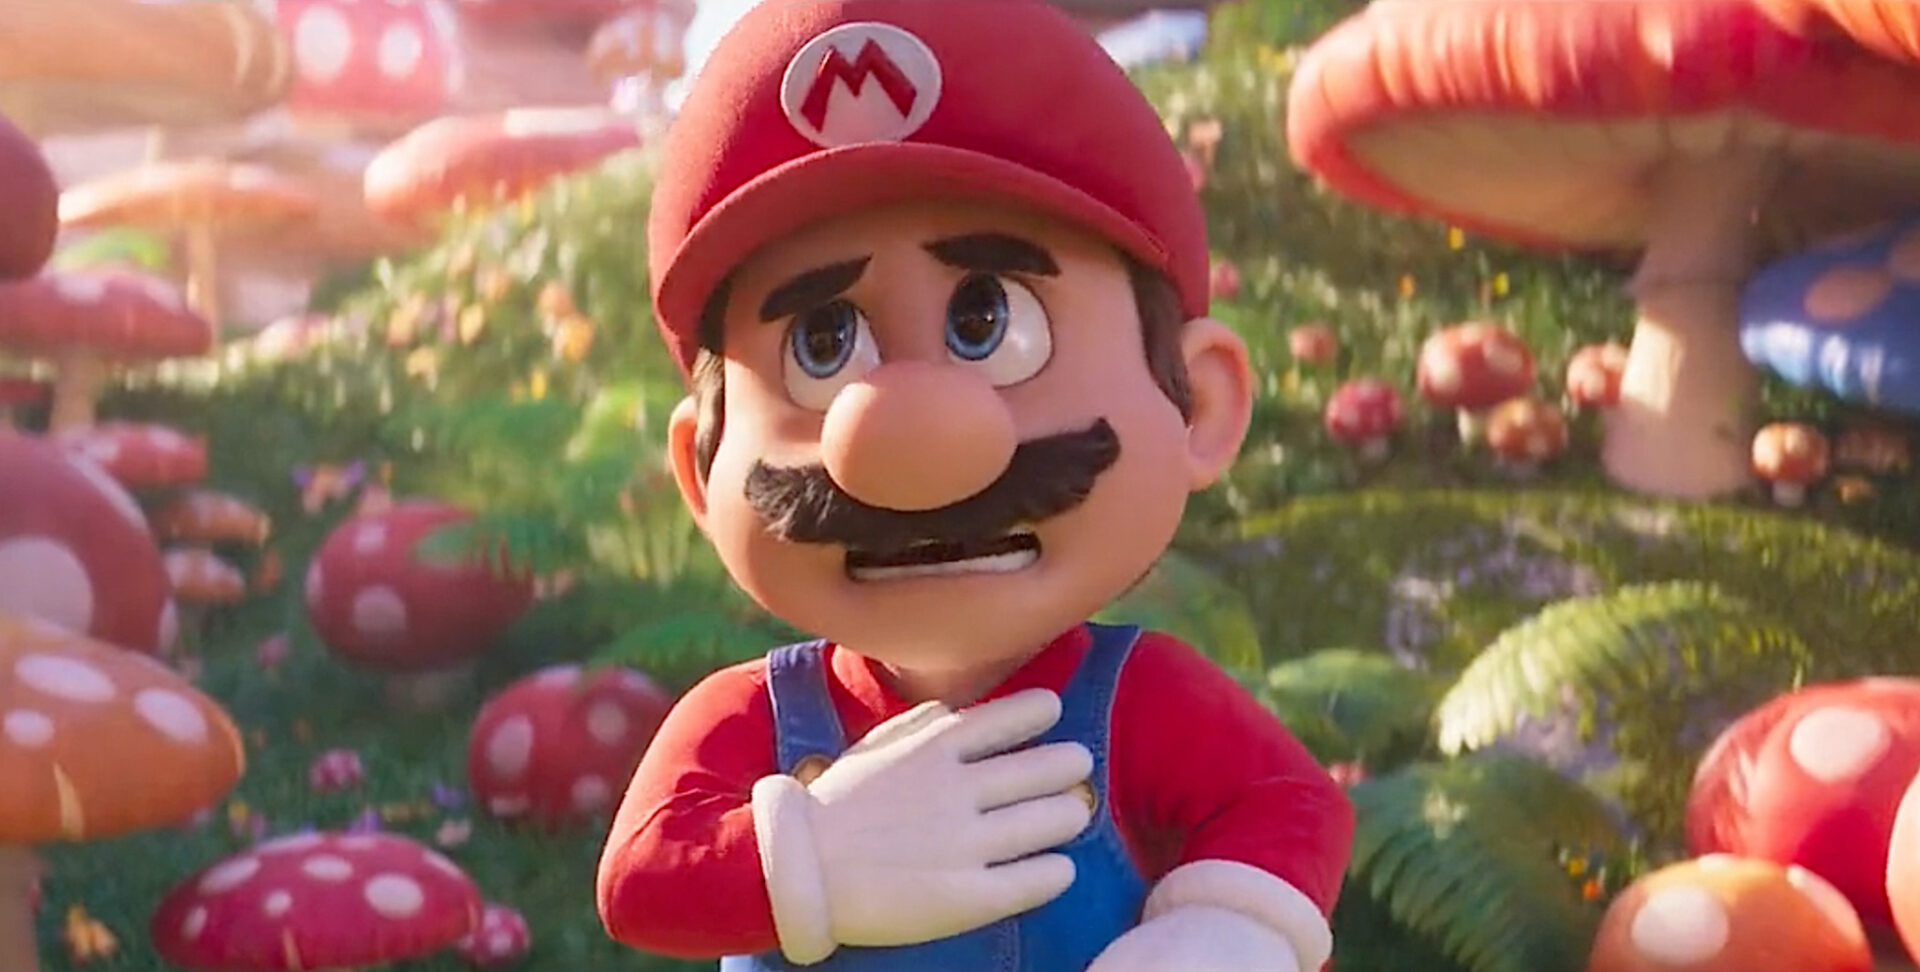 Super Mario Bros. Movie Towers Over Weekend Box Office with $377 Million